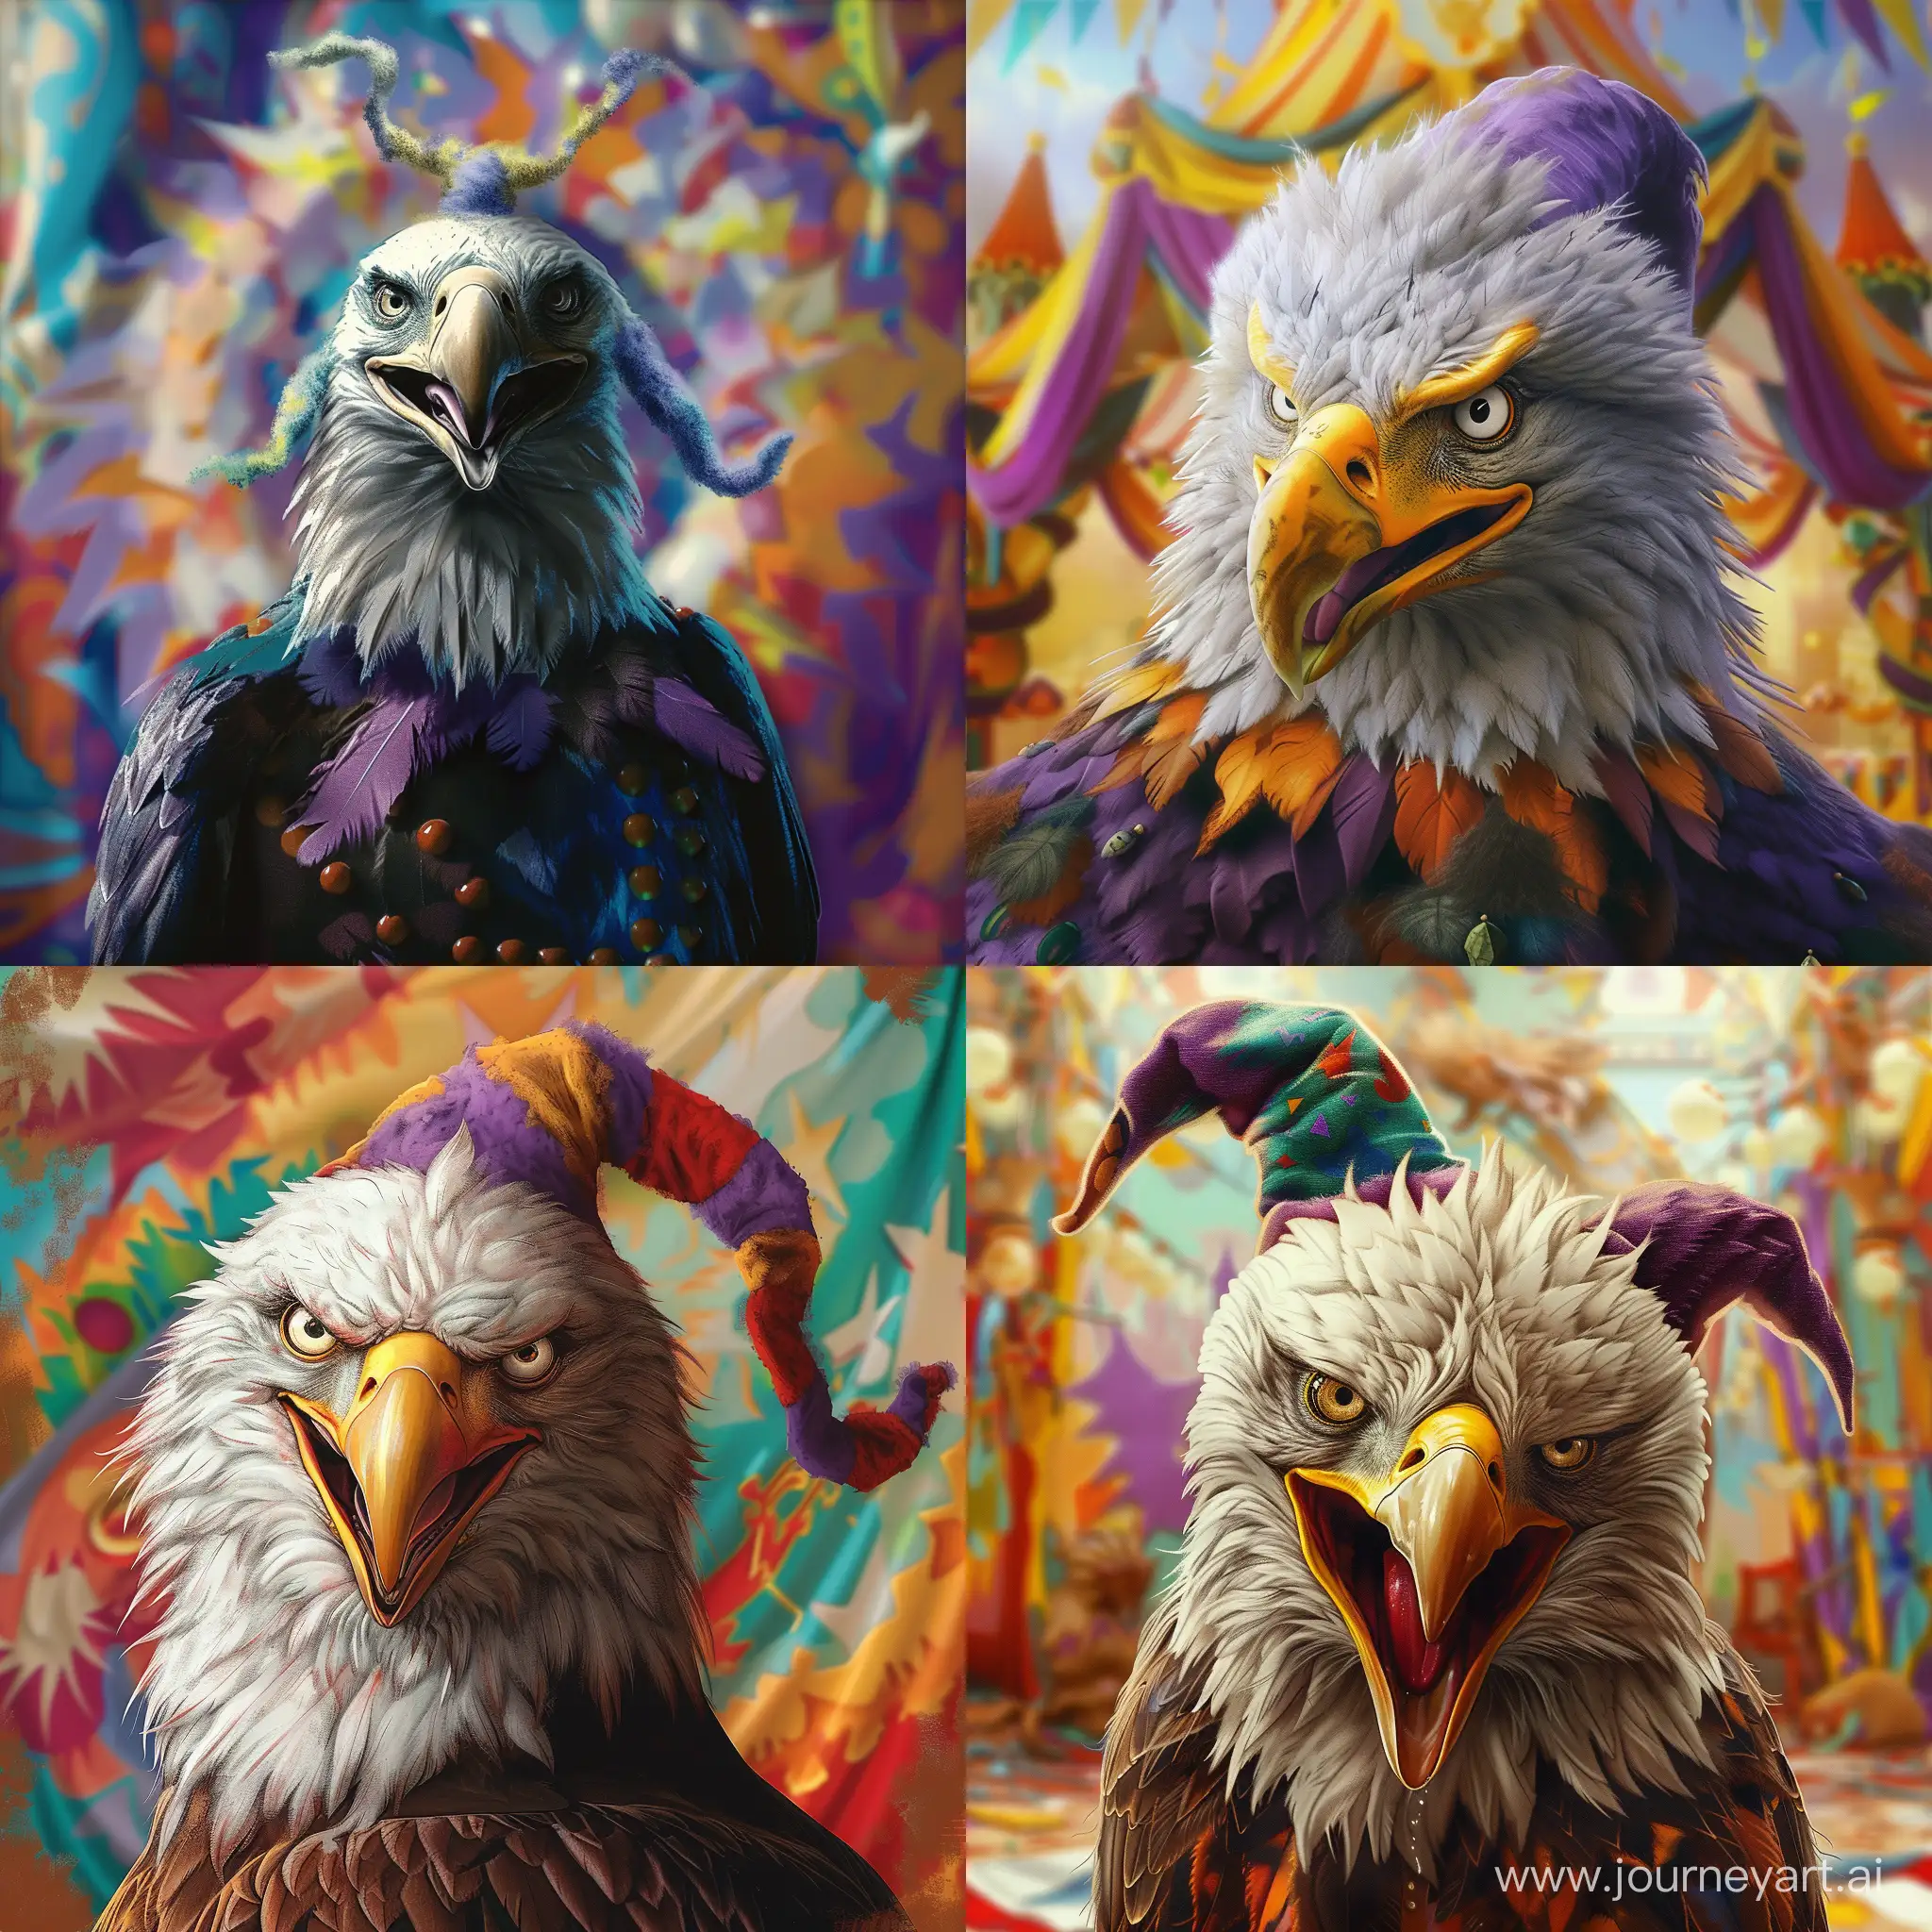 a mischievous jester-like eagle that enjoys ridiculing everything and everyone. The scene should portray the eagle in a whimsical and mocking manner, perhaps with a sly smile or cunning expression. The background could be a colorful, surreal setting to enhance the playful and mischievous atmosphere. Additionally, the image should be stylized to have a high artistic appeal to bring out the character's personality and the overall whimsical theme of the prompt. Please do not enforce anime style --q 3